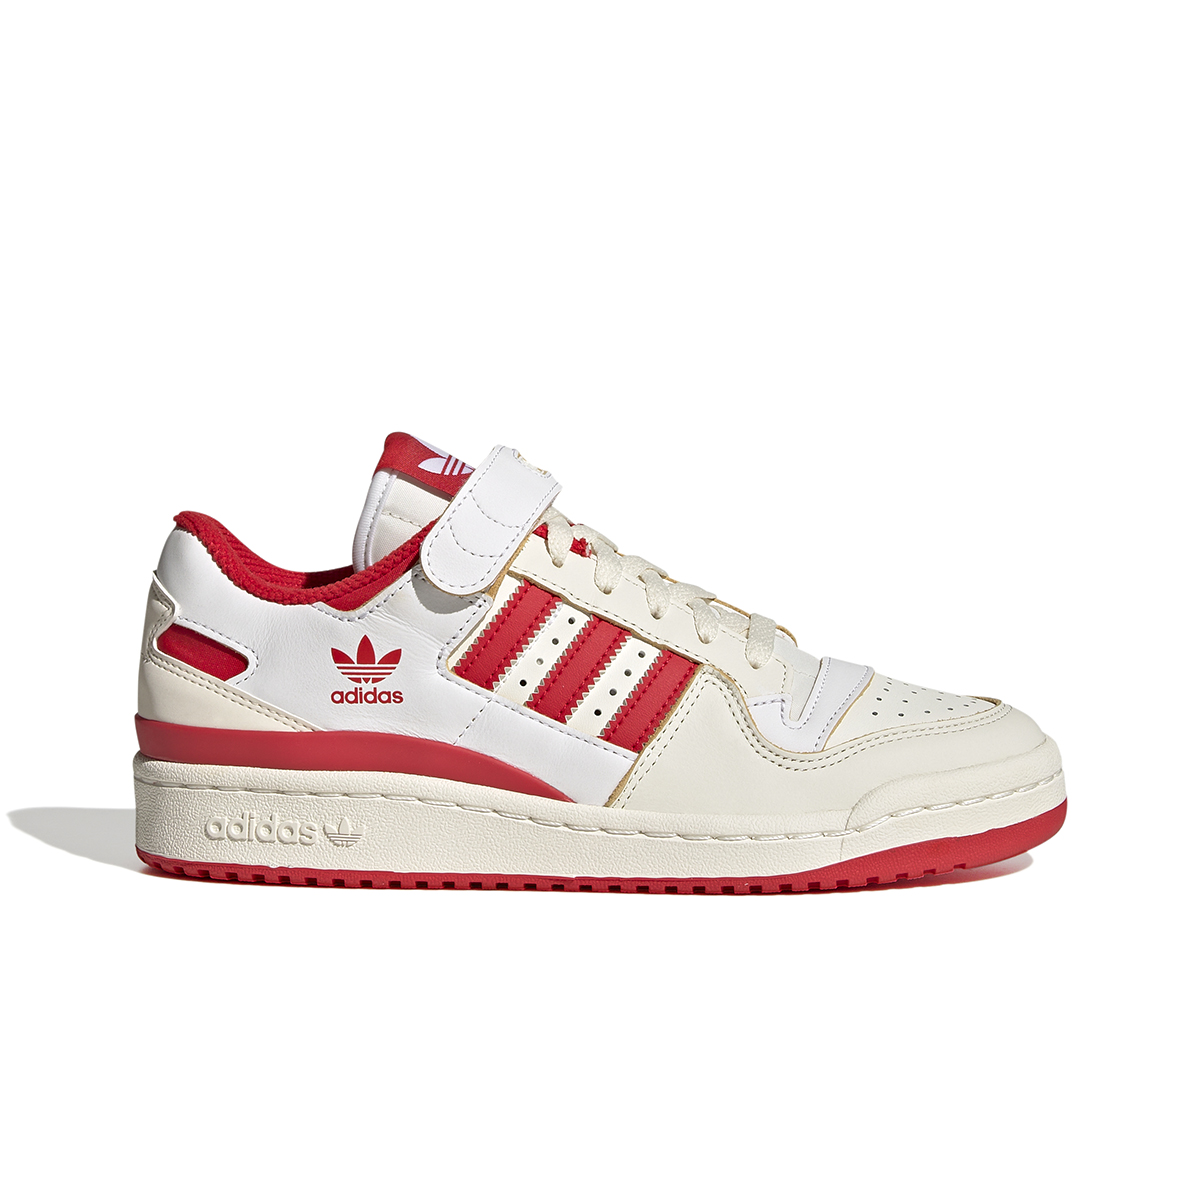 Forum 84 Low W - Off White Vivid Red